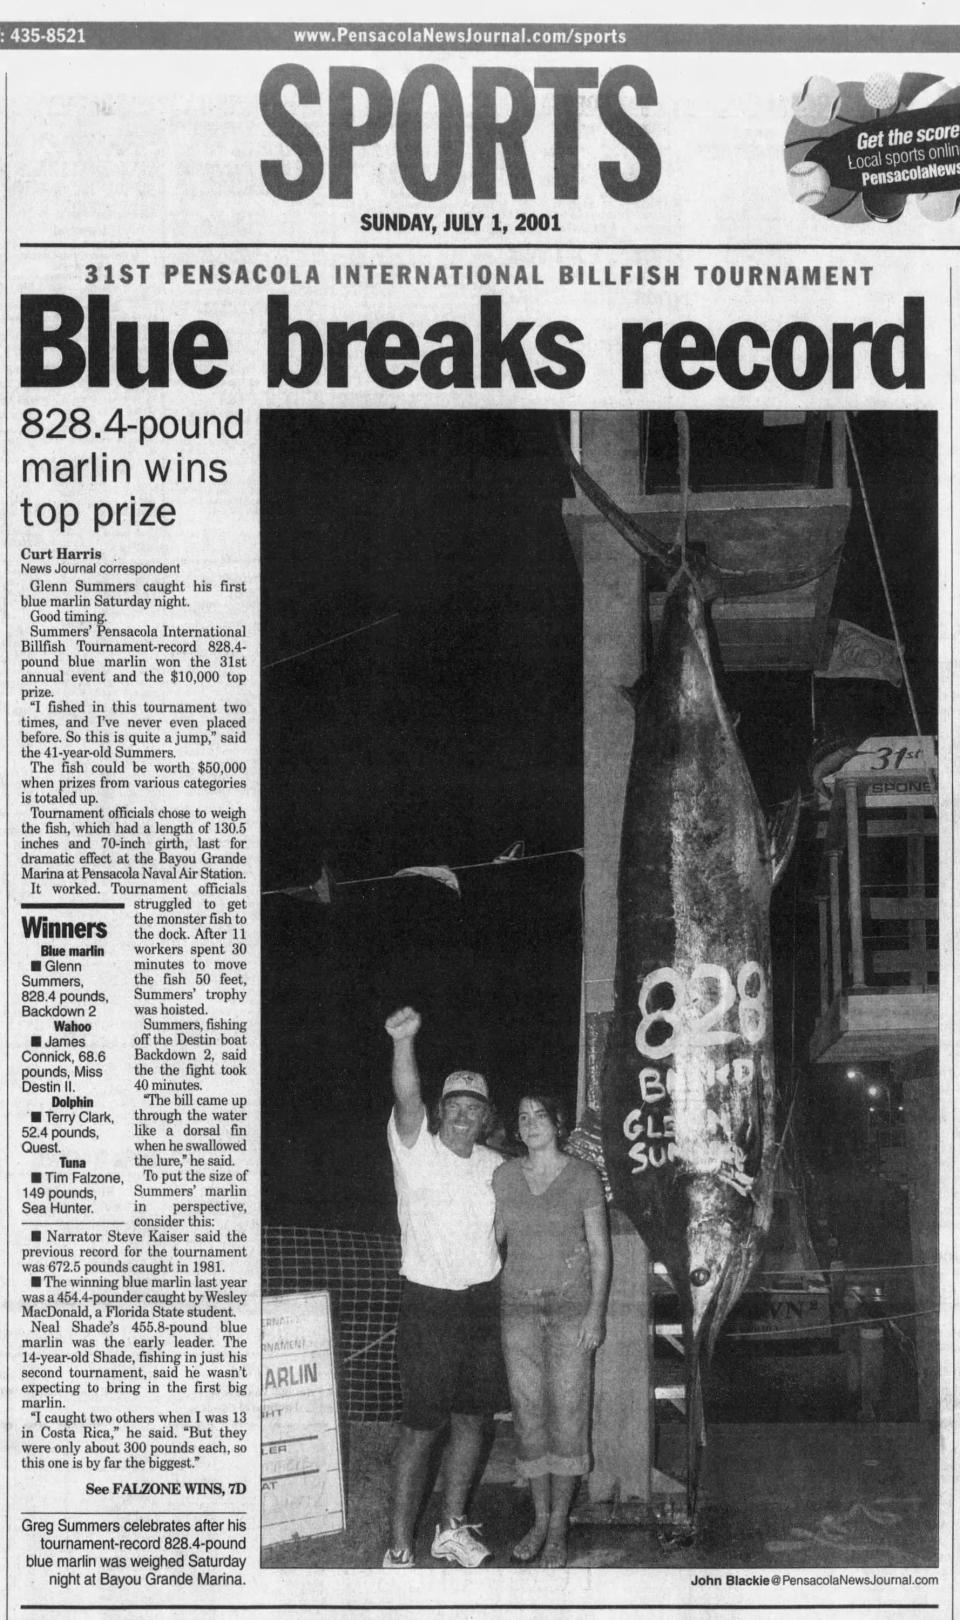 The Pensacola News Journal article about the record 828.4-pound blue marlin caught by angler Glenn Summers and boat captain Gary Jarvis during the 2001 Pensacola International Billfish Tournament. A life-size replica of this fish is displayed at the new Slick Lips Seafood & Oyster House restaurant on Palafox Place in downtown Pensacola.